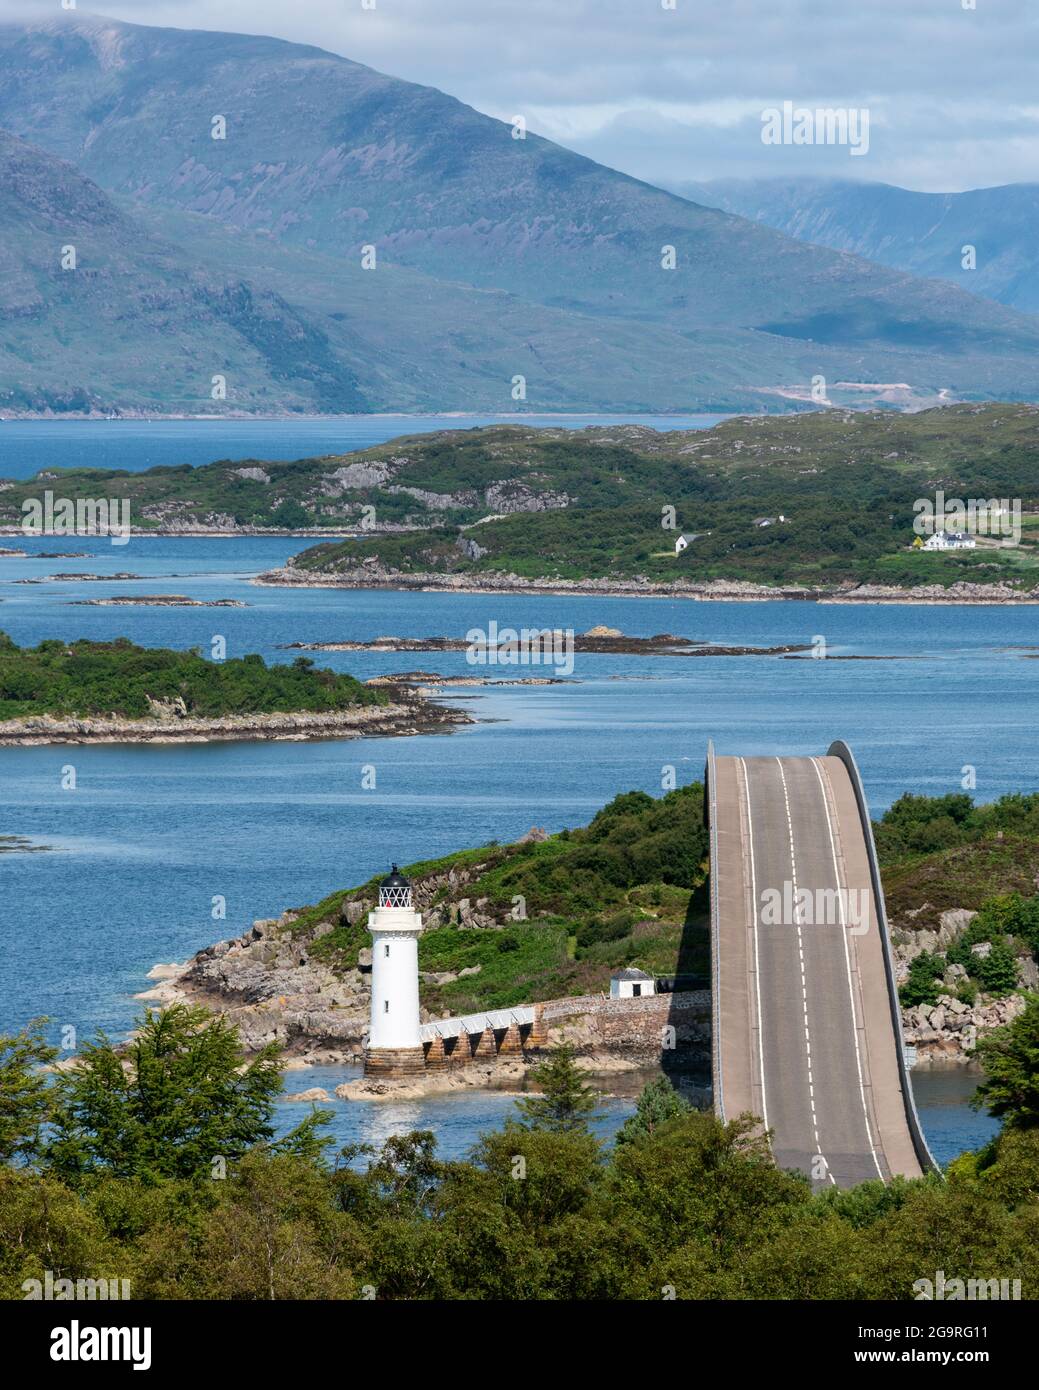 The Skye Bridge is a road bridge over Loch Alsh, Scotland, connecting the Isle of Skye to the island of Eilean Bàn and onto the mainland. Kyleakin Lig Stock Photo